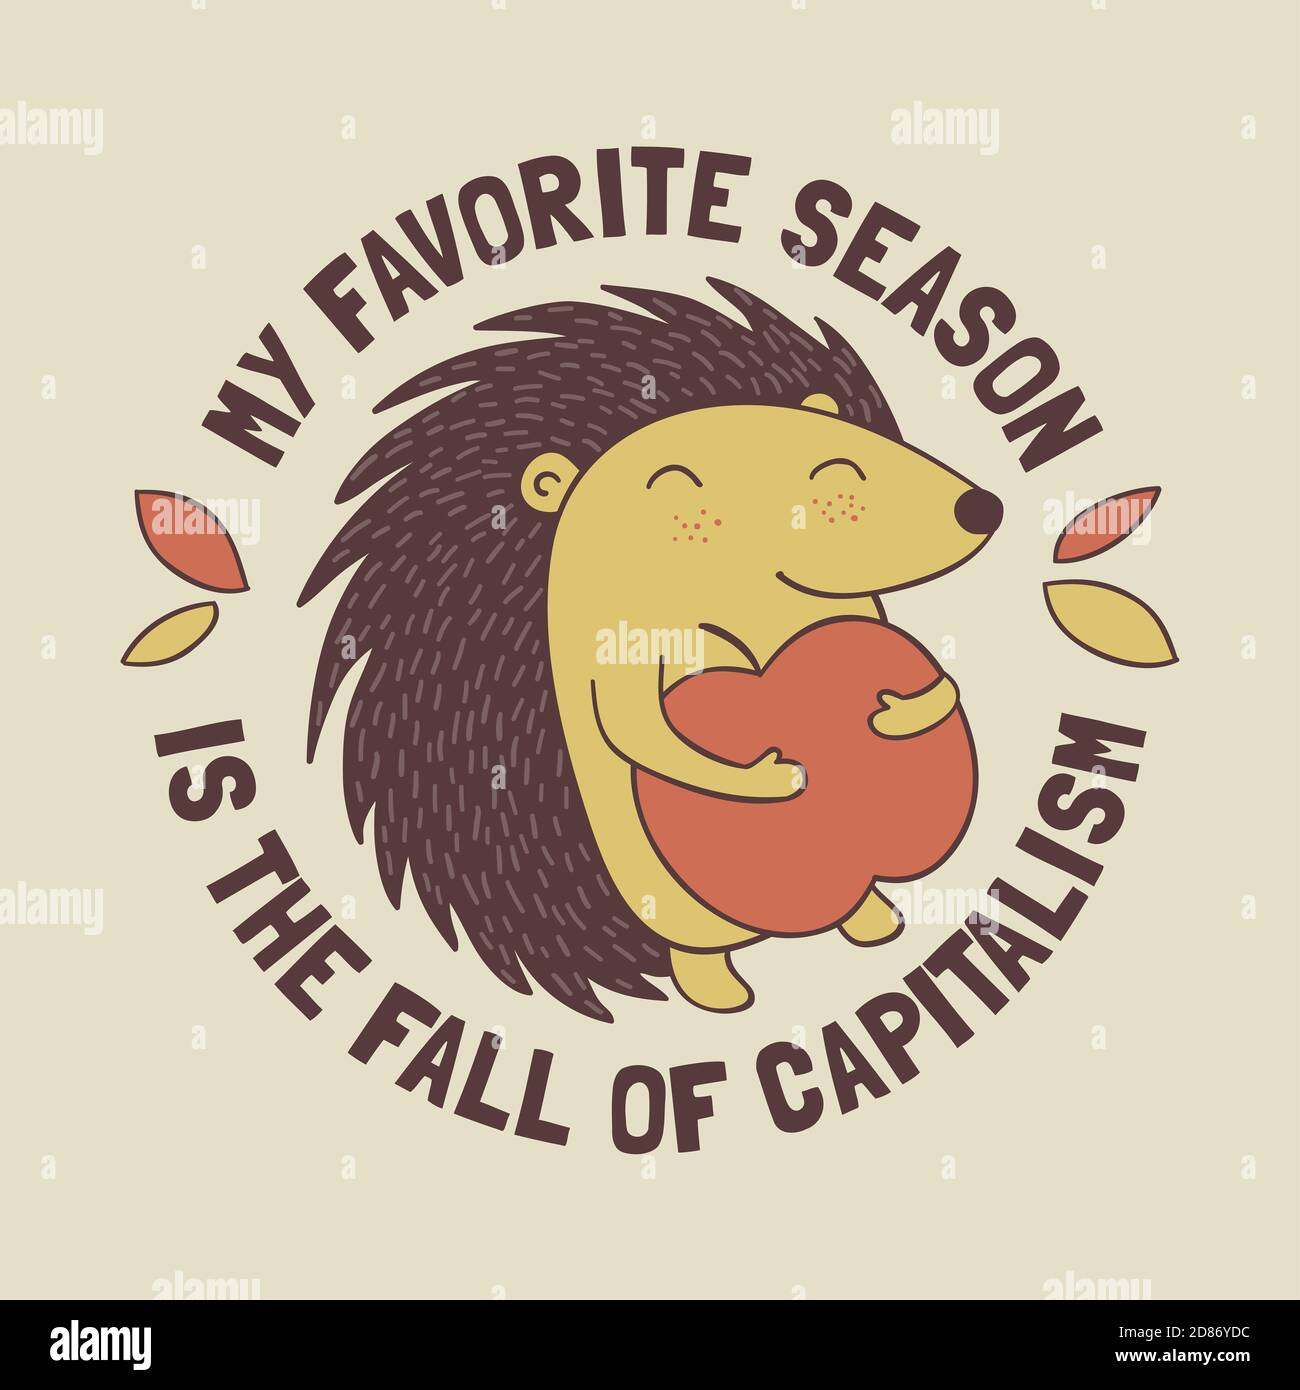 Cute cartoon hedgehog holding an apple with the anti capitalist message My favorite season is the fall of capitalism. Funny and radical illustration. Stock Photo